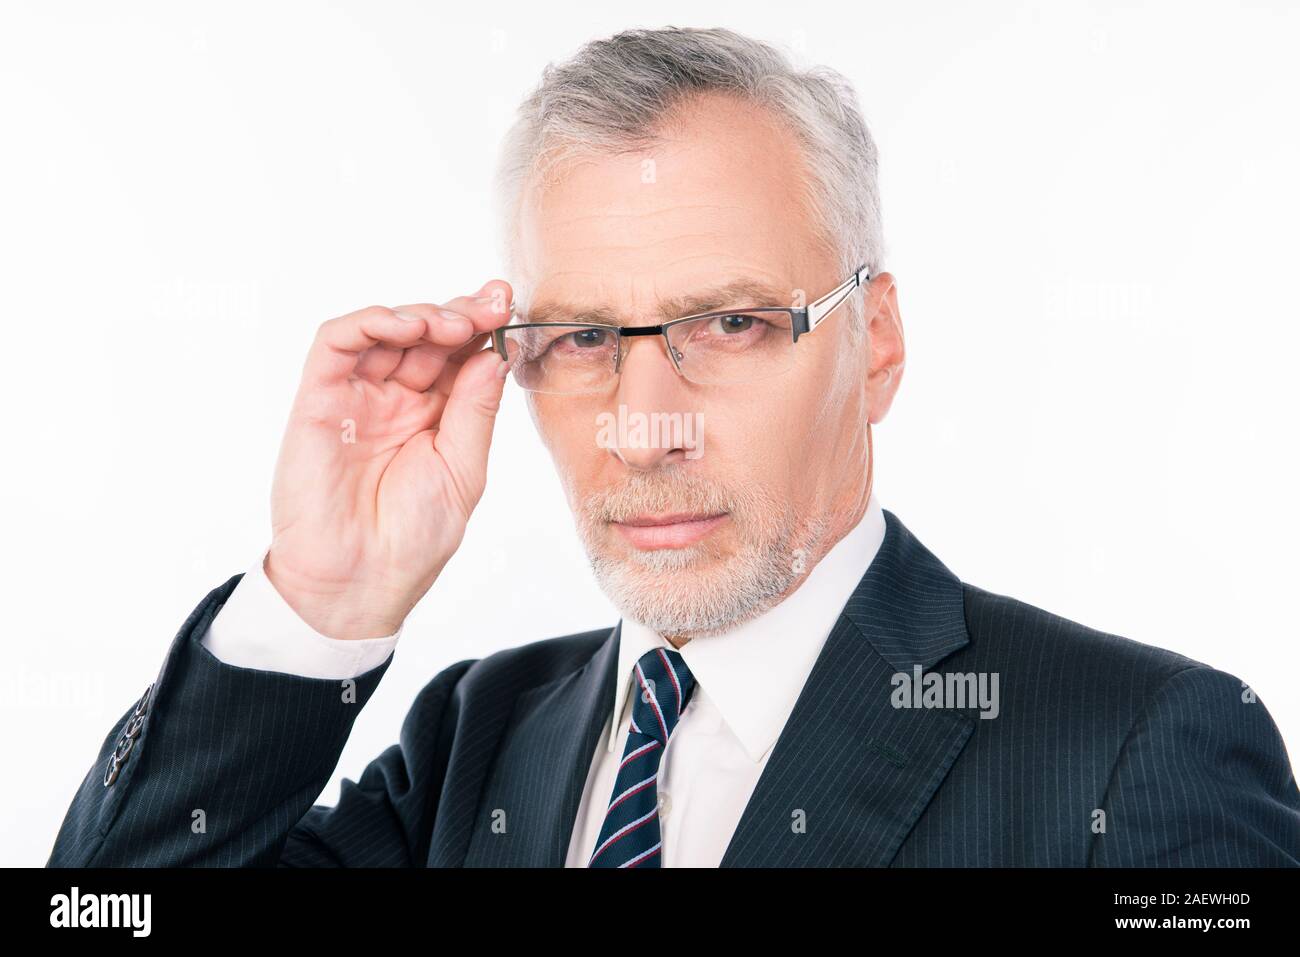 handsome serios businessman with gray beard holding glasses Stock Photo